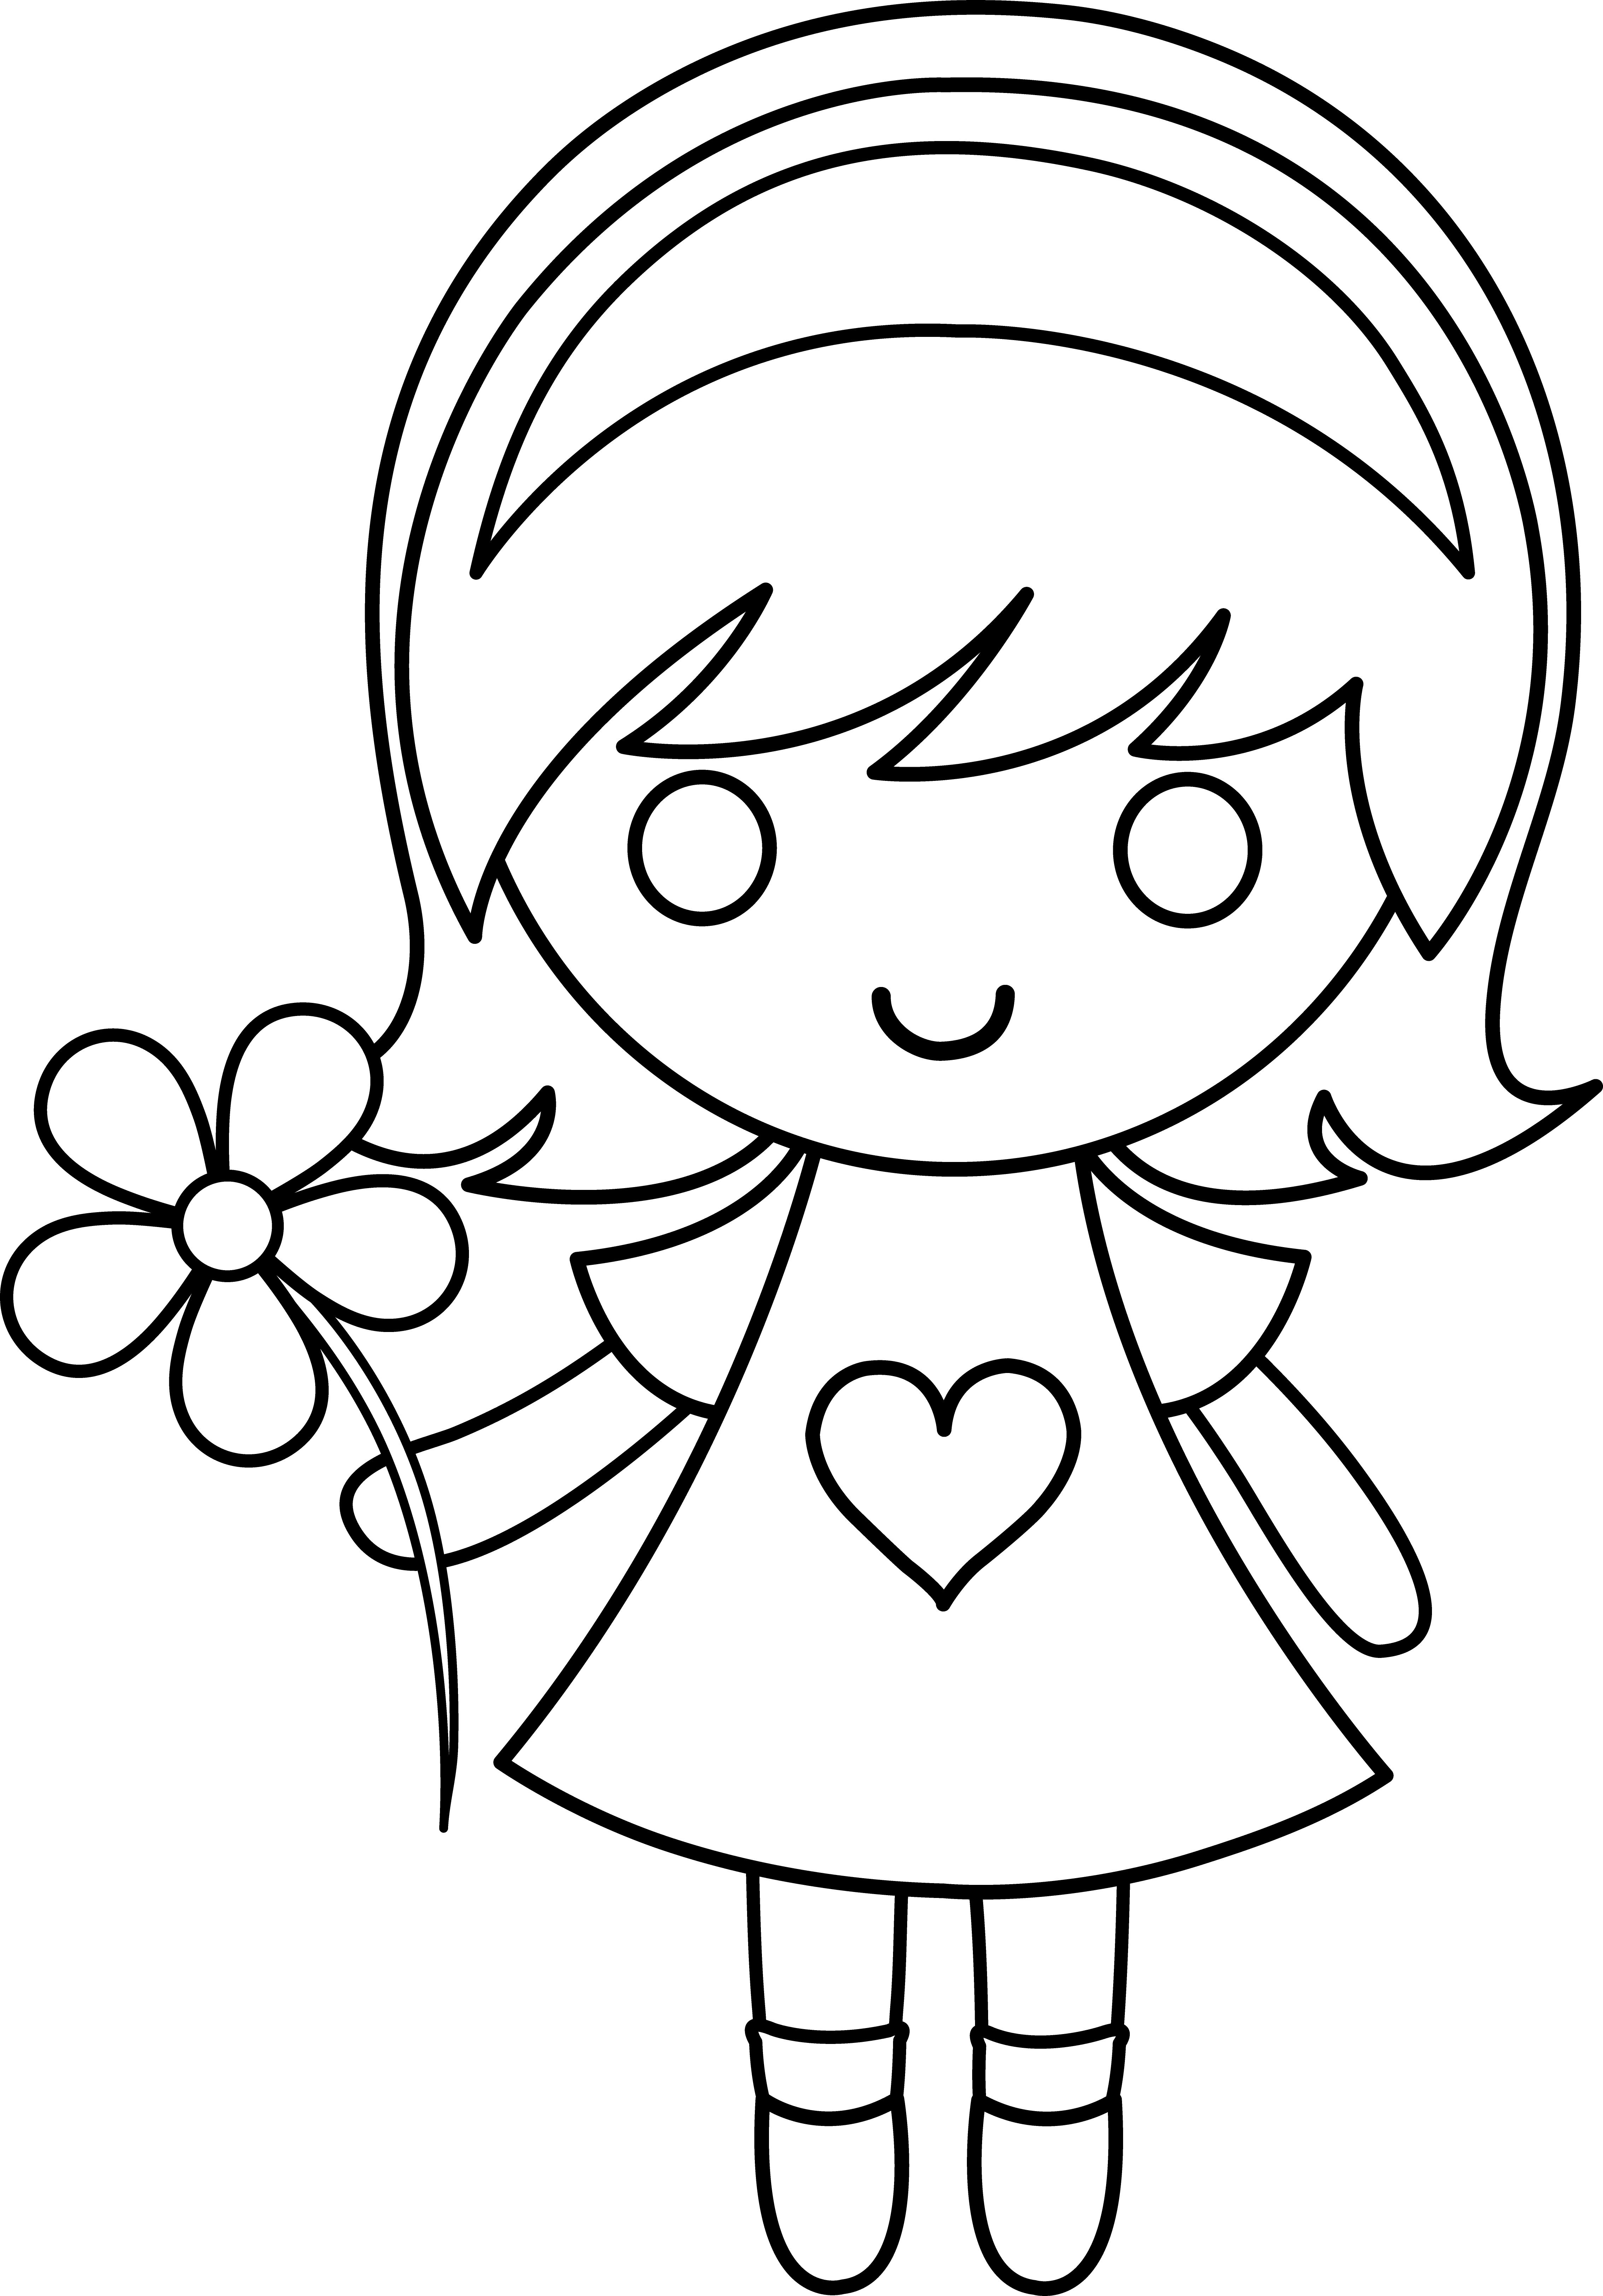 Daisy colorable line art. Draw clipart little girl coloring